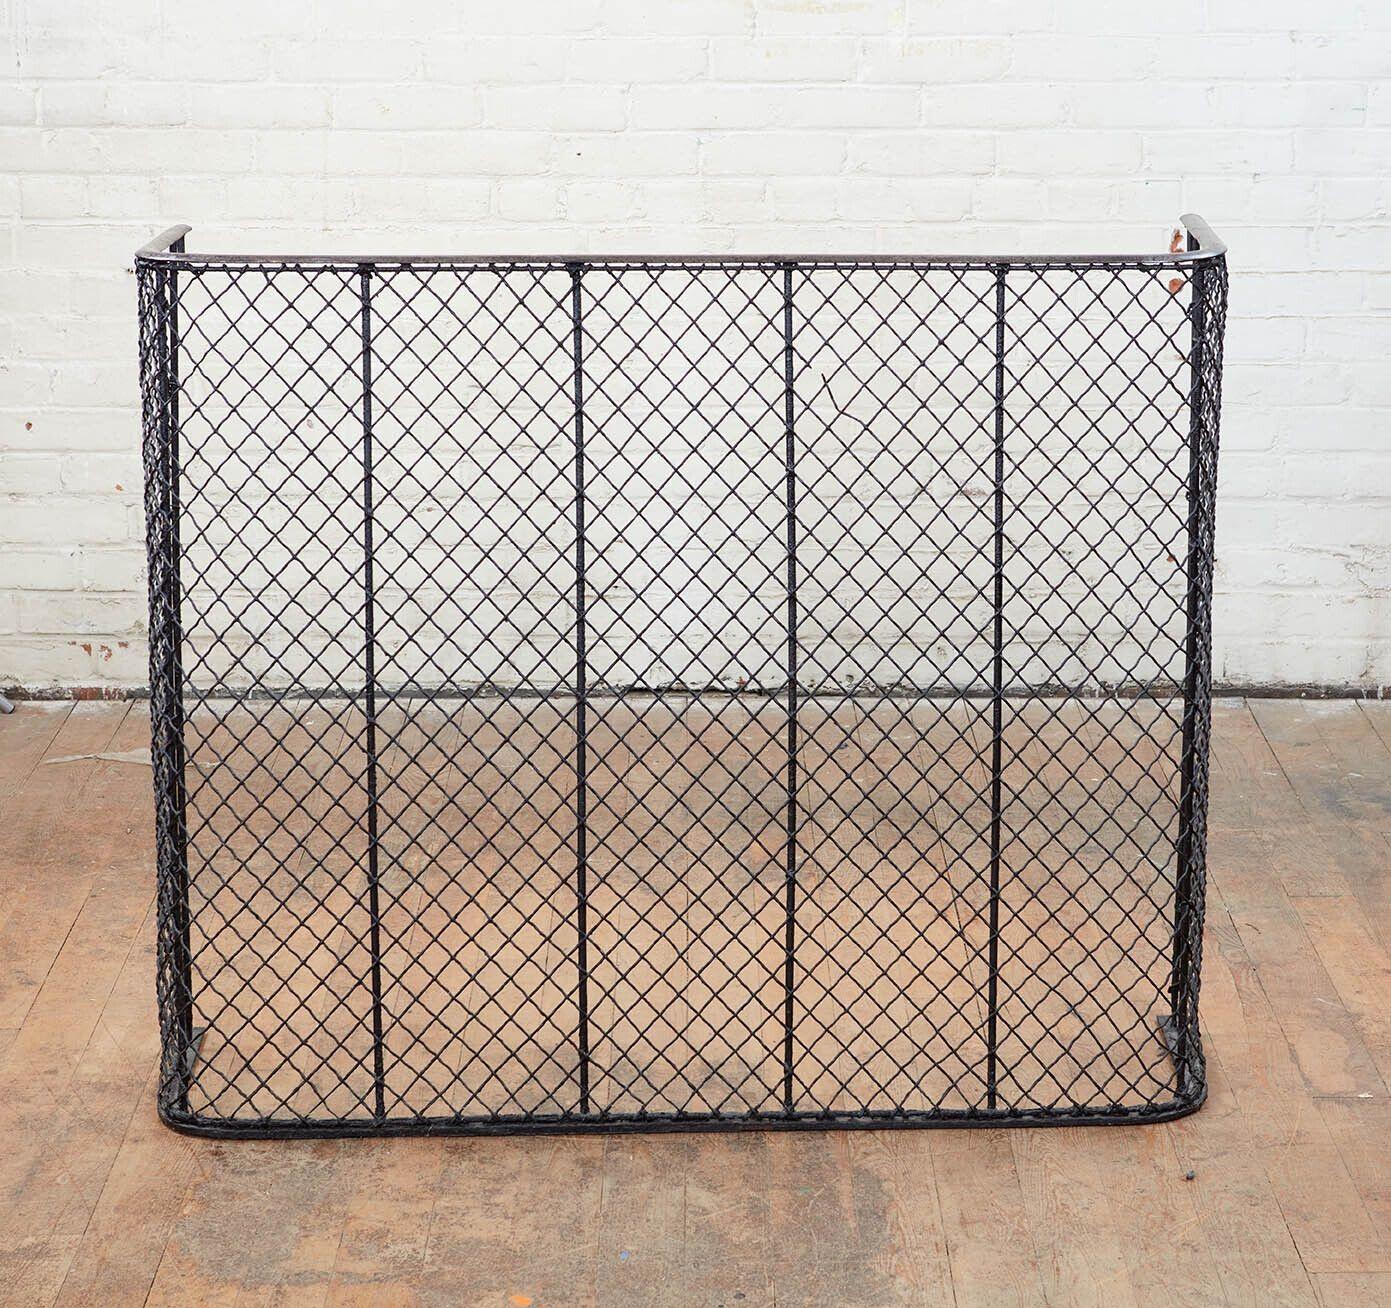 A large fireplace guard with heavy iron cross hatched wire netting and iron base and rod supports topped by a steel rail. Known as a nursery guard as it is not meant as a spark guard, but is designed to keep children and dogs away from the fire. A